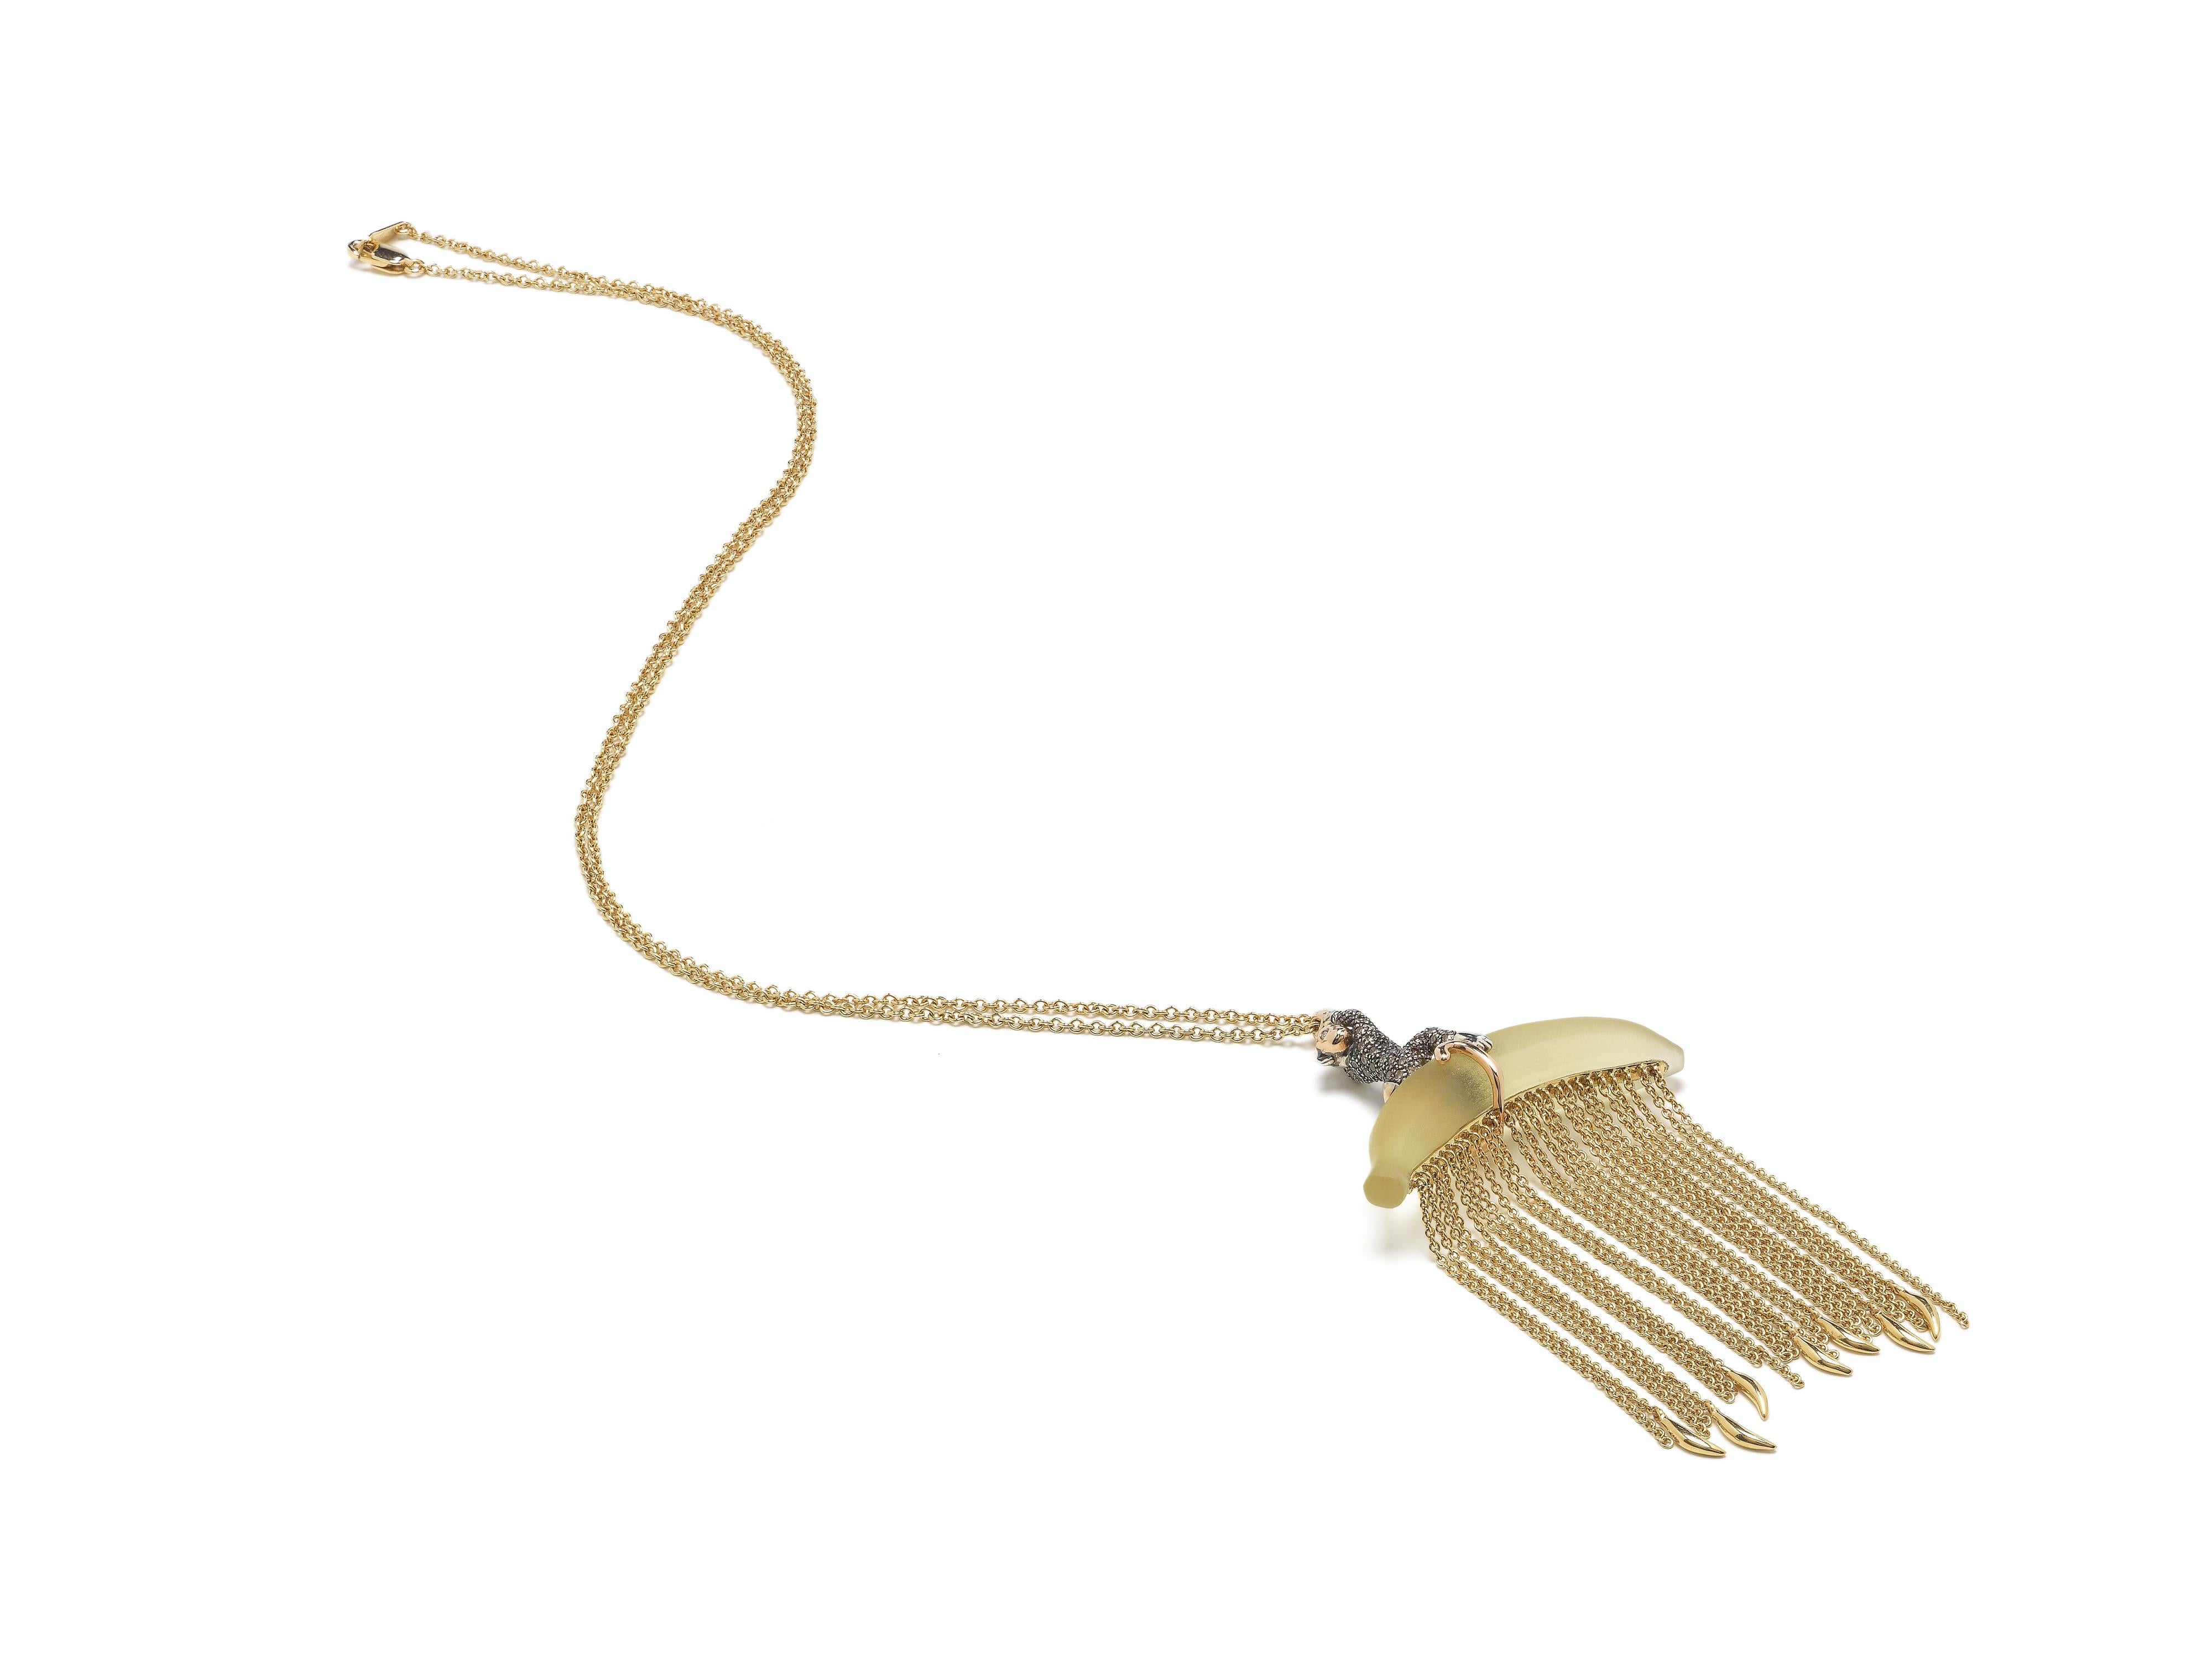 

The gold fringing on this Monkey Chain Necklace lends the piece a glamorous allure. Designed in 18k rose and yellow gold, the pendant necklace is crafted as a lemon quartz banana on which sits a monkey in rose gold and sterling silver, embellished